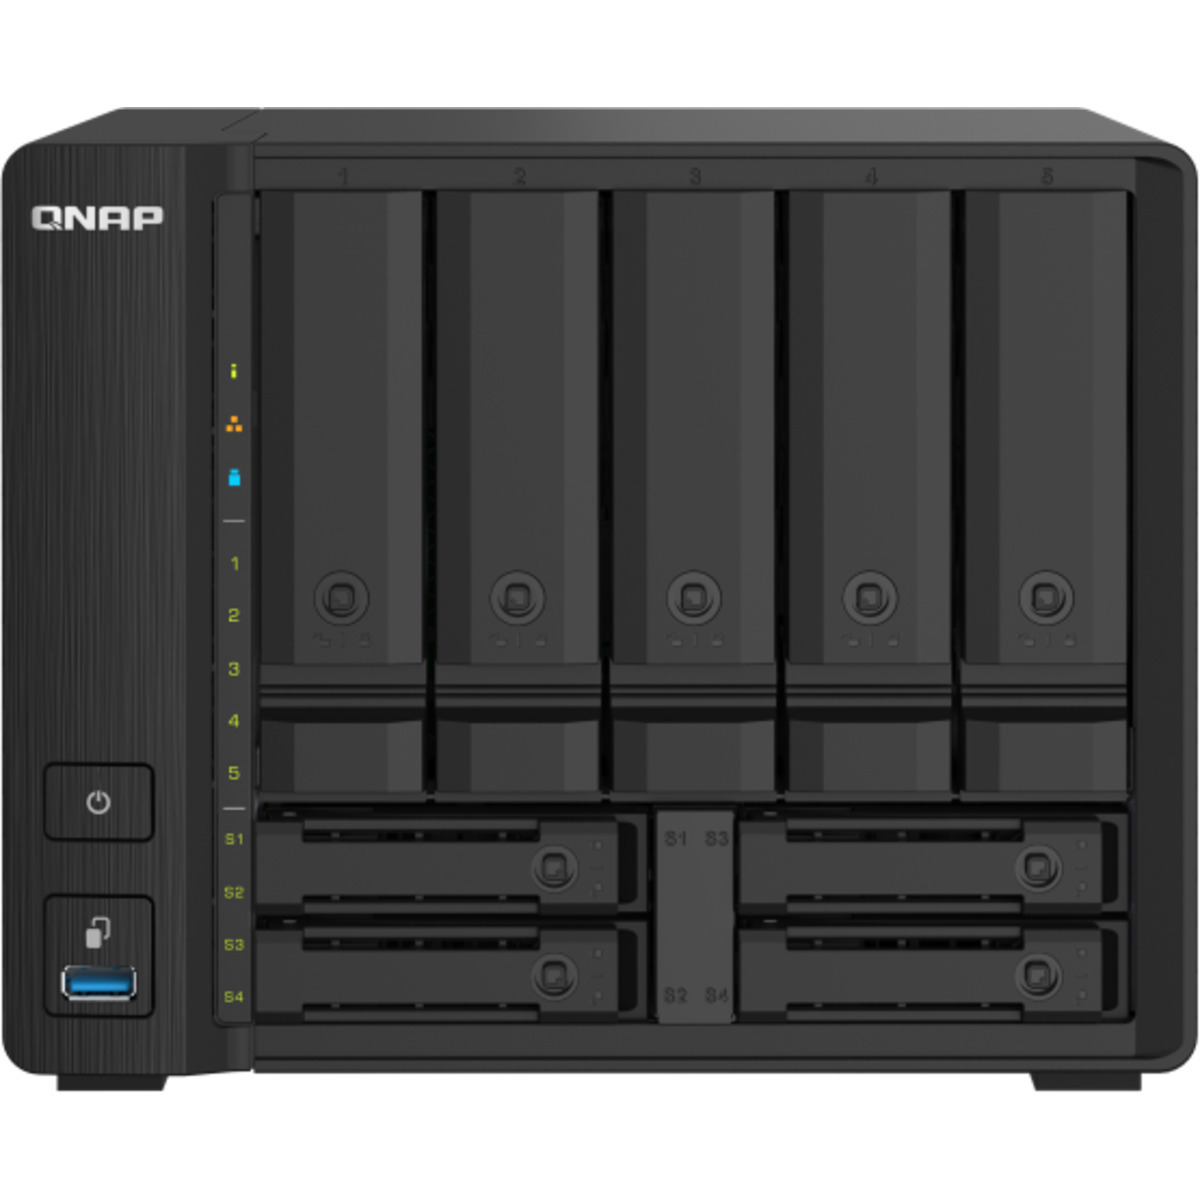 QNAP TS-932PX 4tb 5+4-Bay Desktop Multimedia / Power User / Business NAS - Network Attached Storage Device 4x1tb Western Digital Red SA500 WDS100T1R0A 2.5 560/530MB/s SATA 6Gb/s SSD NAS Class Drives Installed - Burn-In Tested - FREE RAM UPGRADE TS-932PX